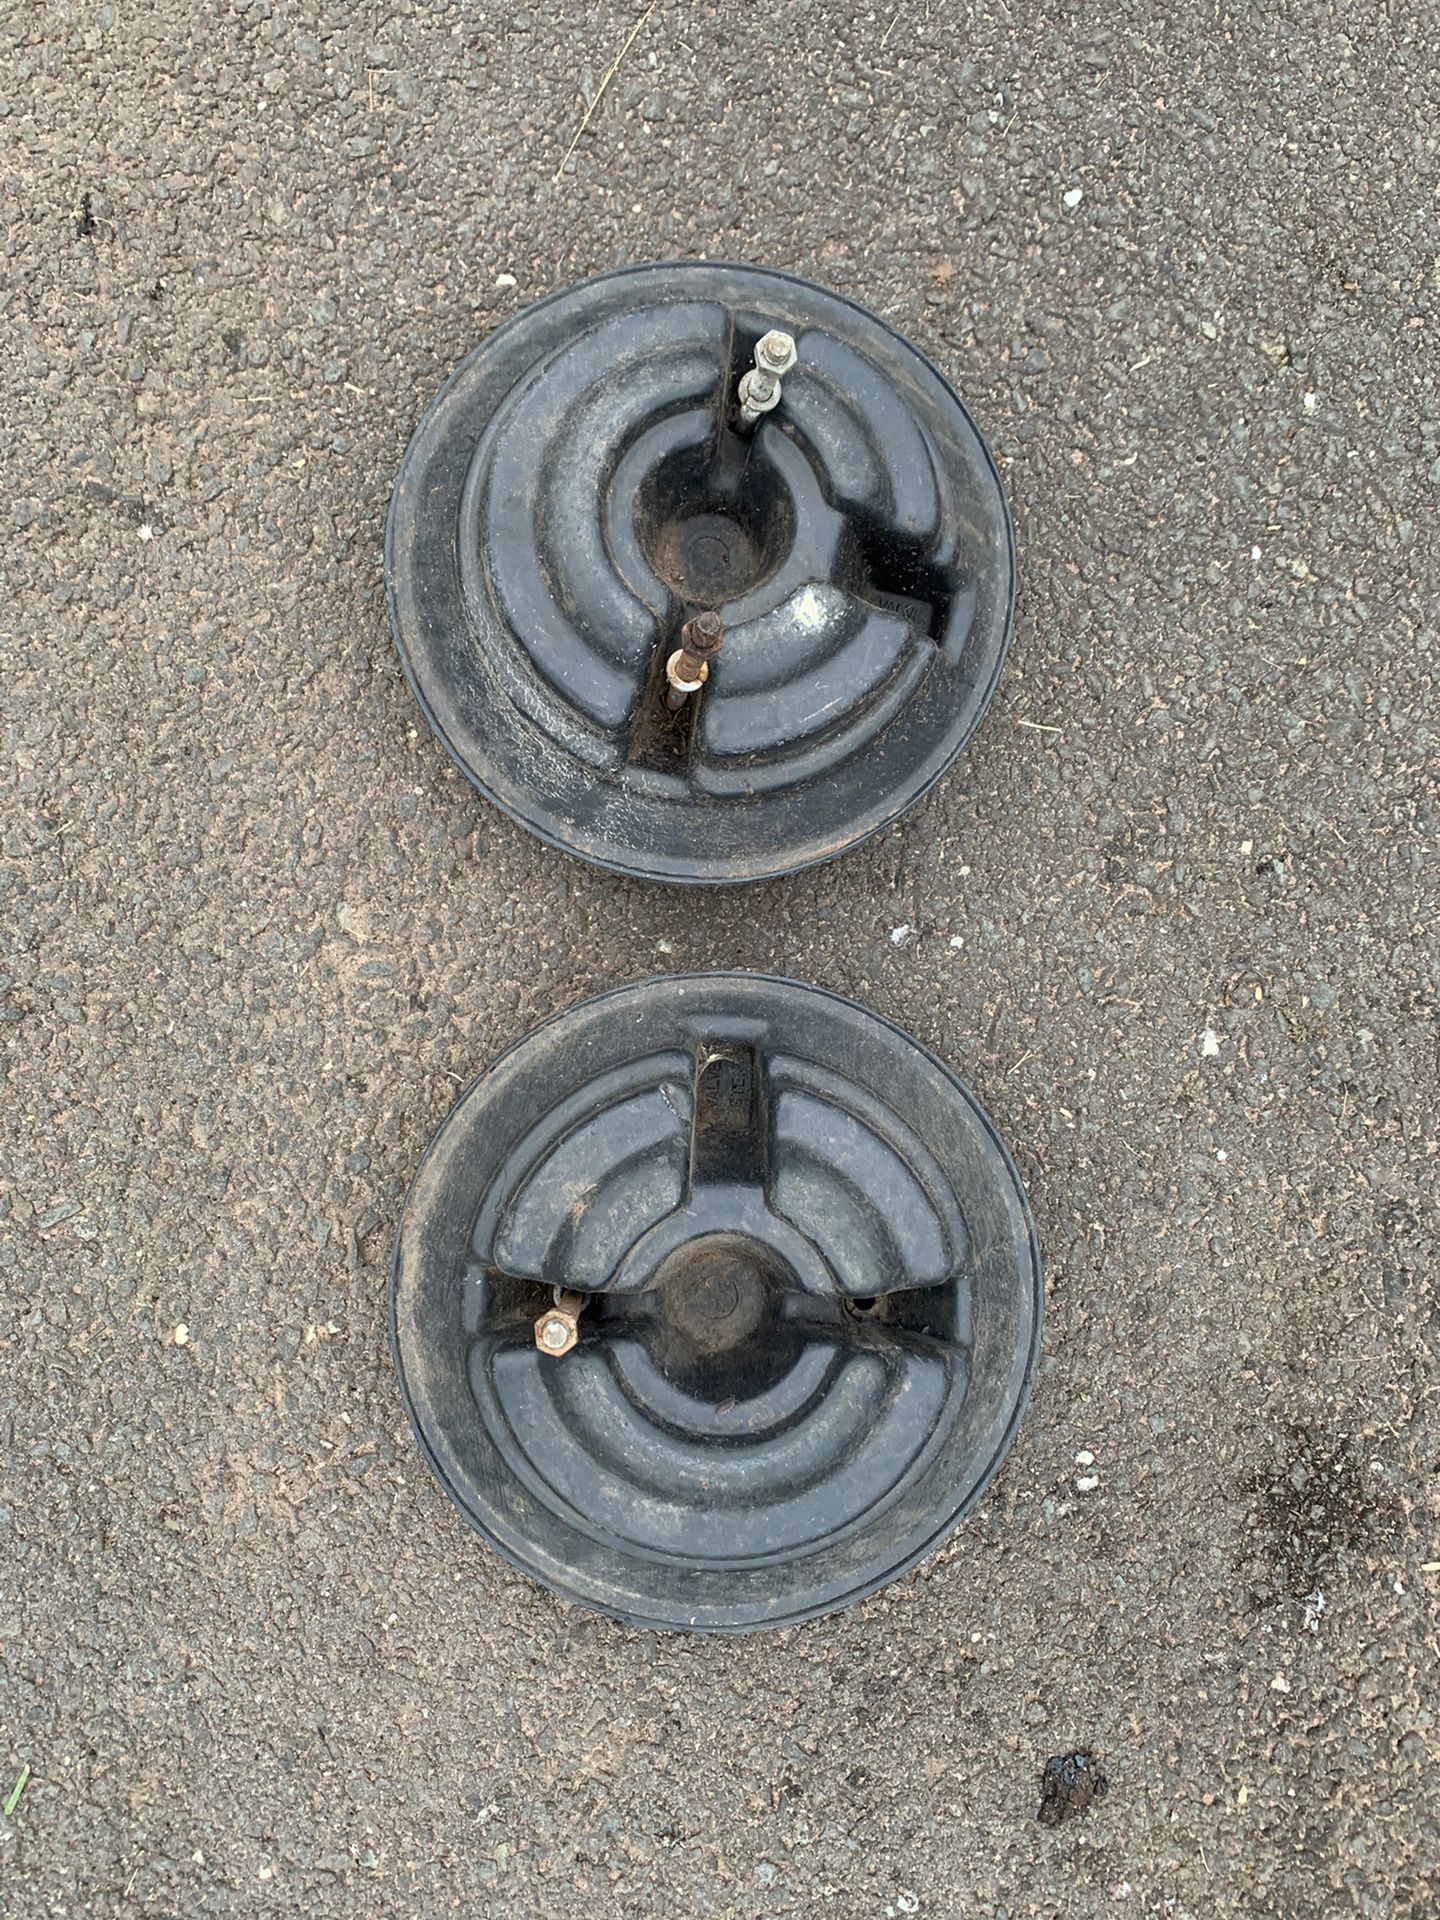 Snow tractor or lawnmower tractor weights for tires. 2 pieces